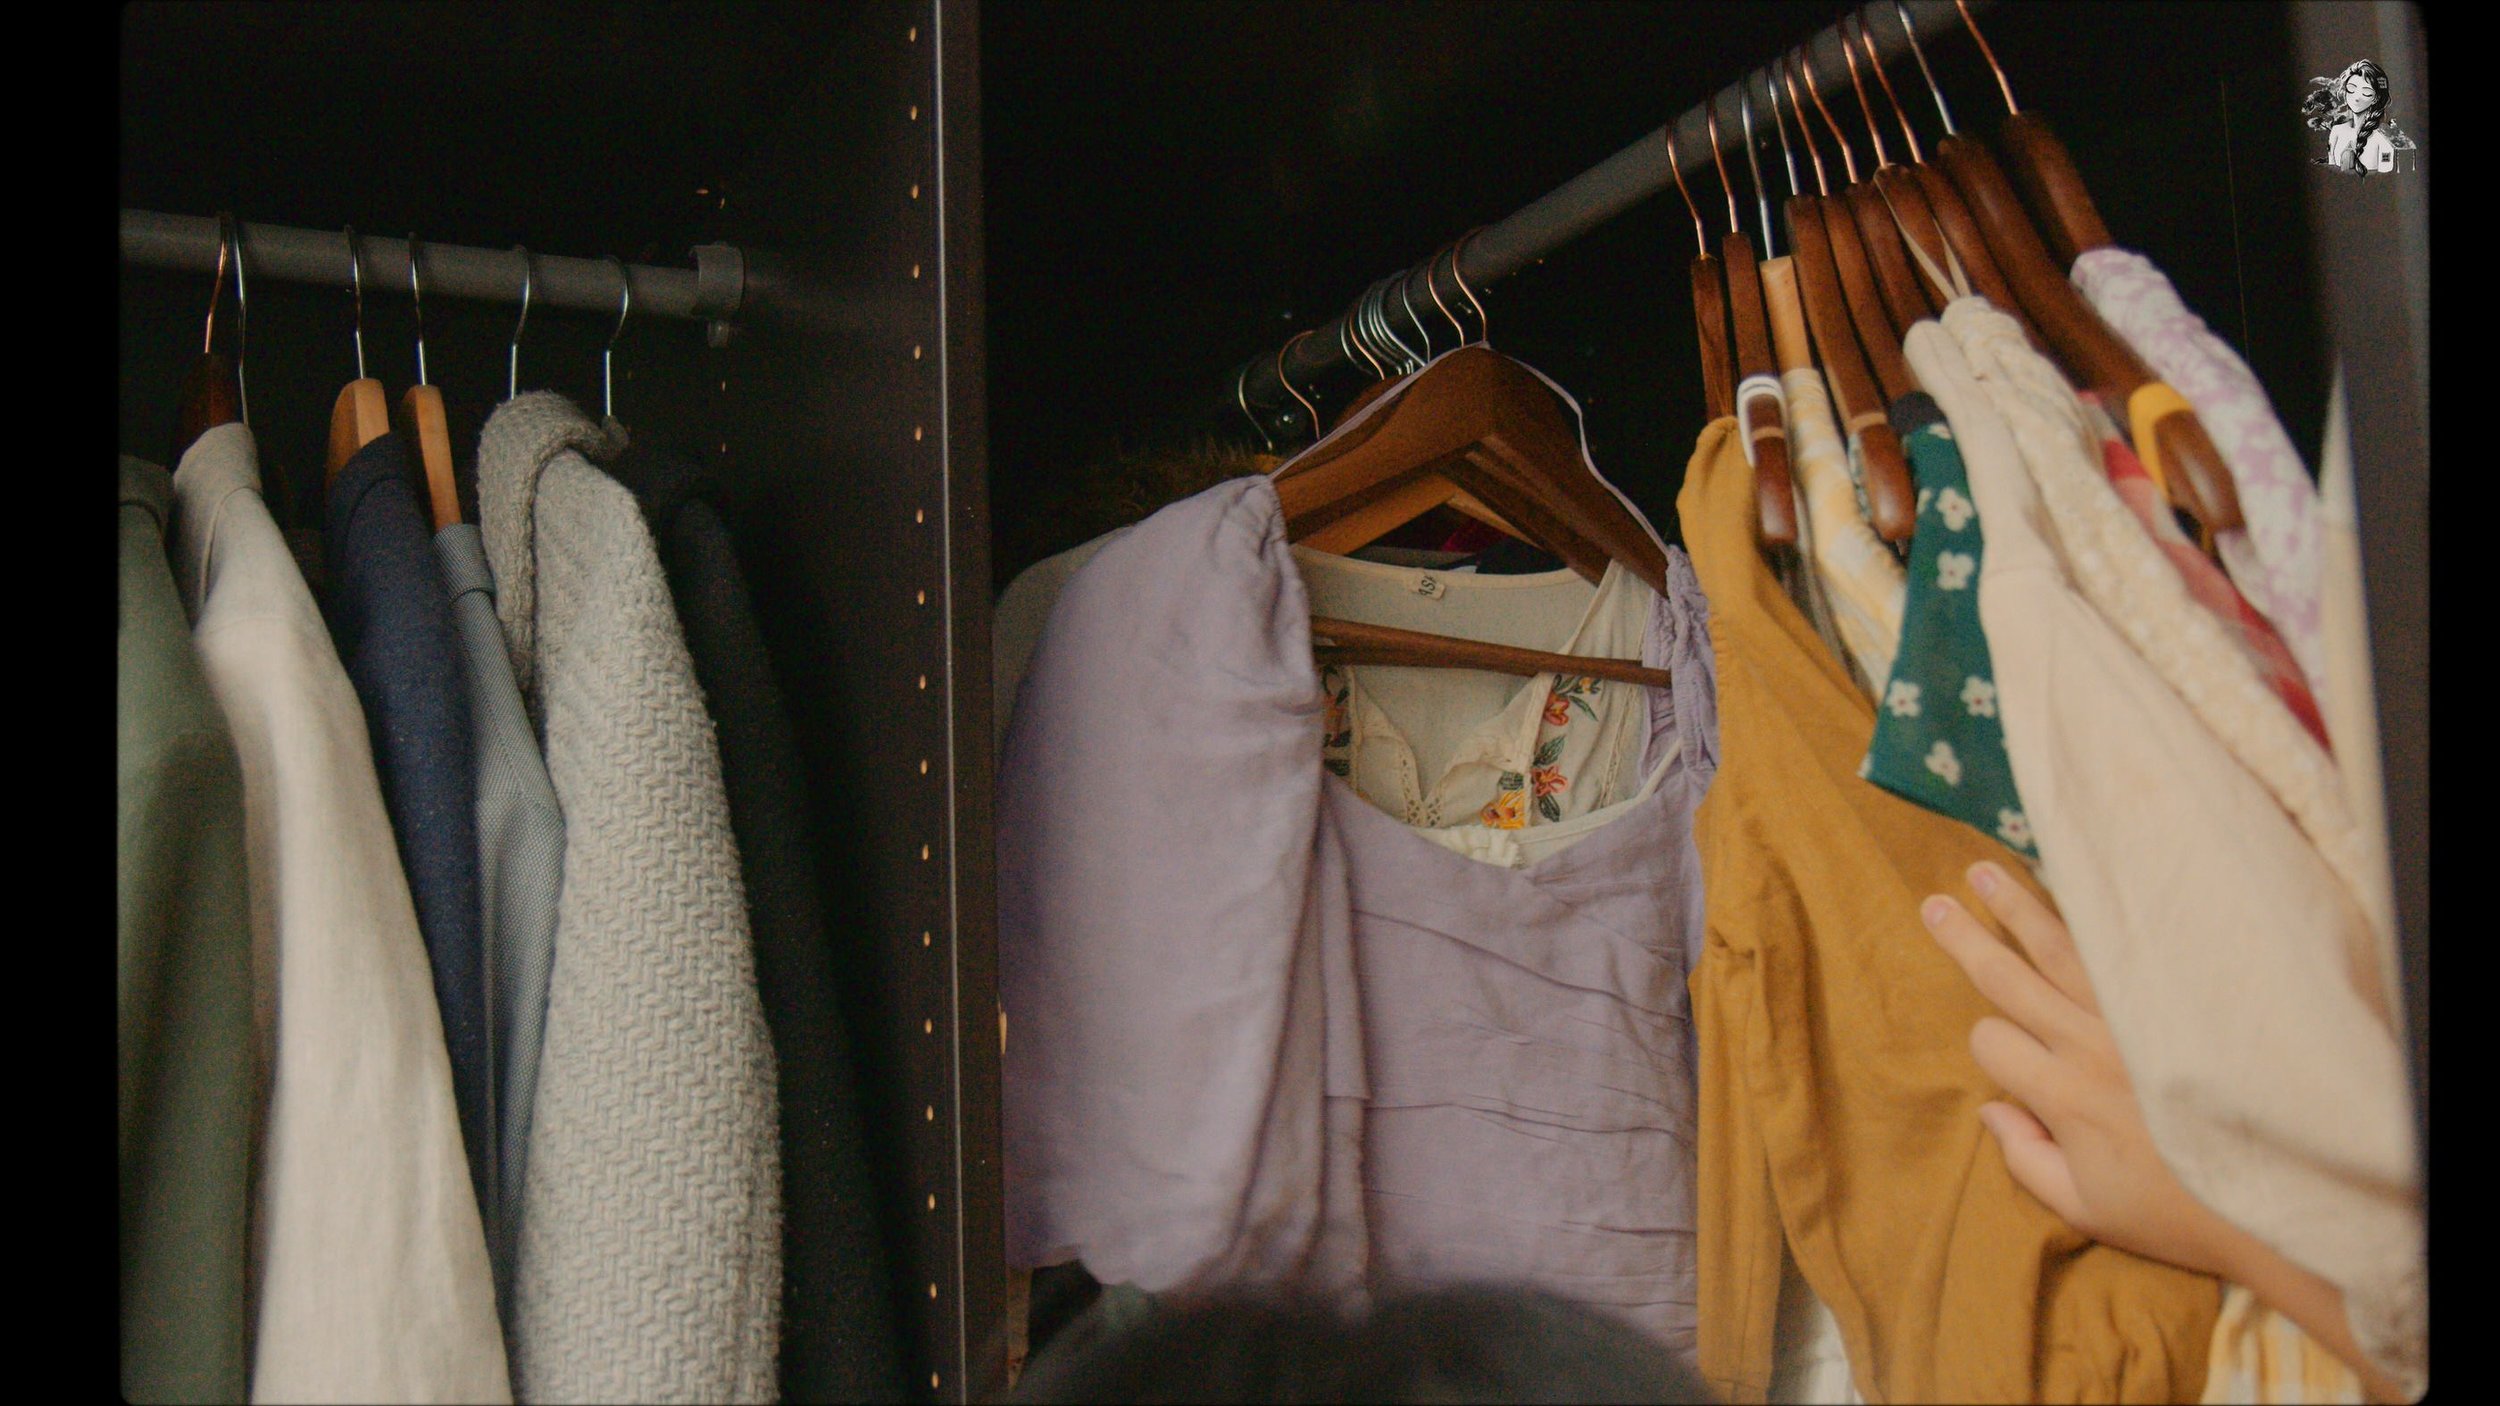 Wadrobe Tour - What's in my Closet - Her86m2_1.78.1.jpg